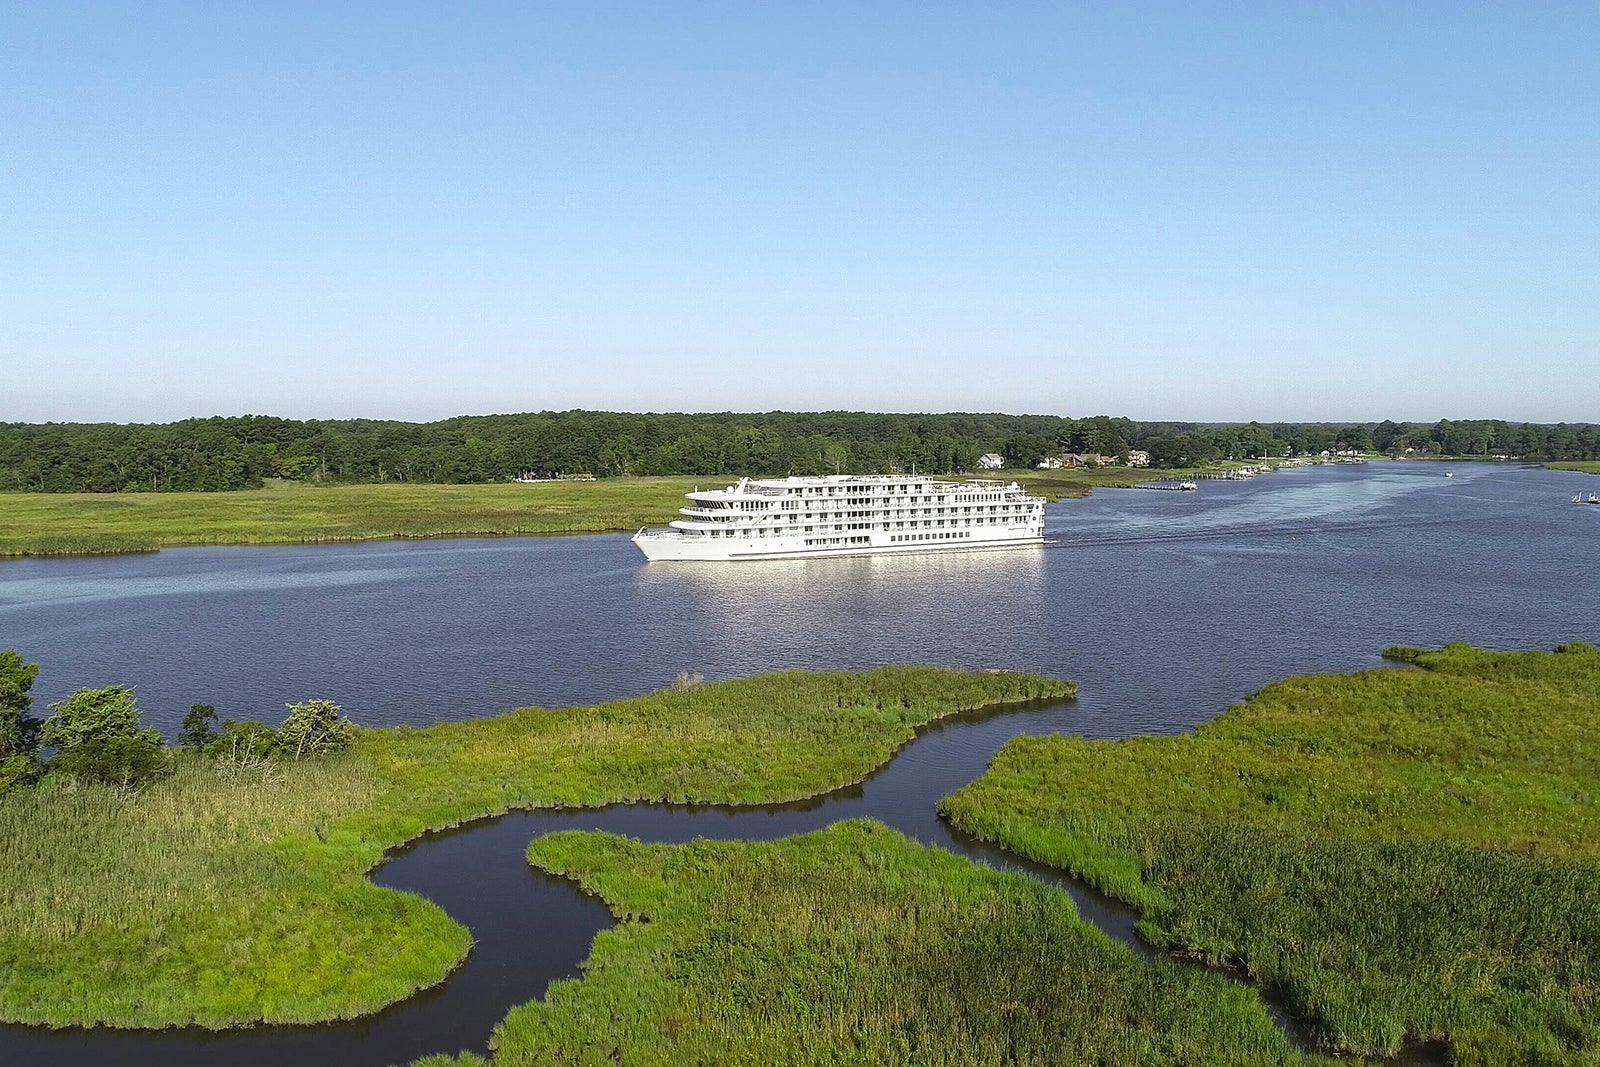 Best Mississippi River cruises for seniors, history buffs and Americana lovers